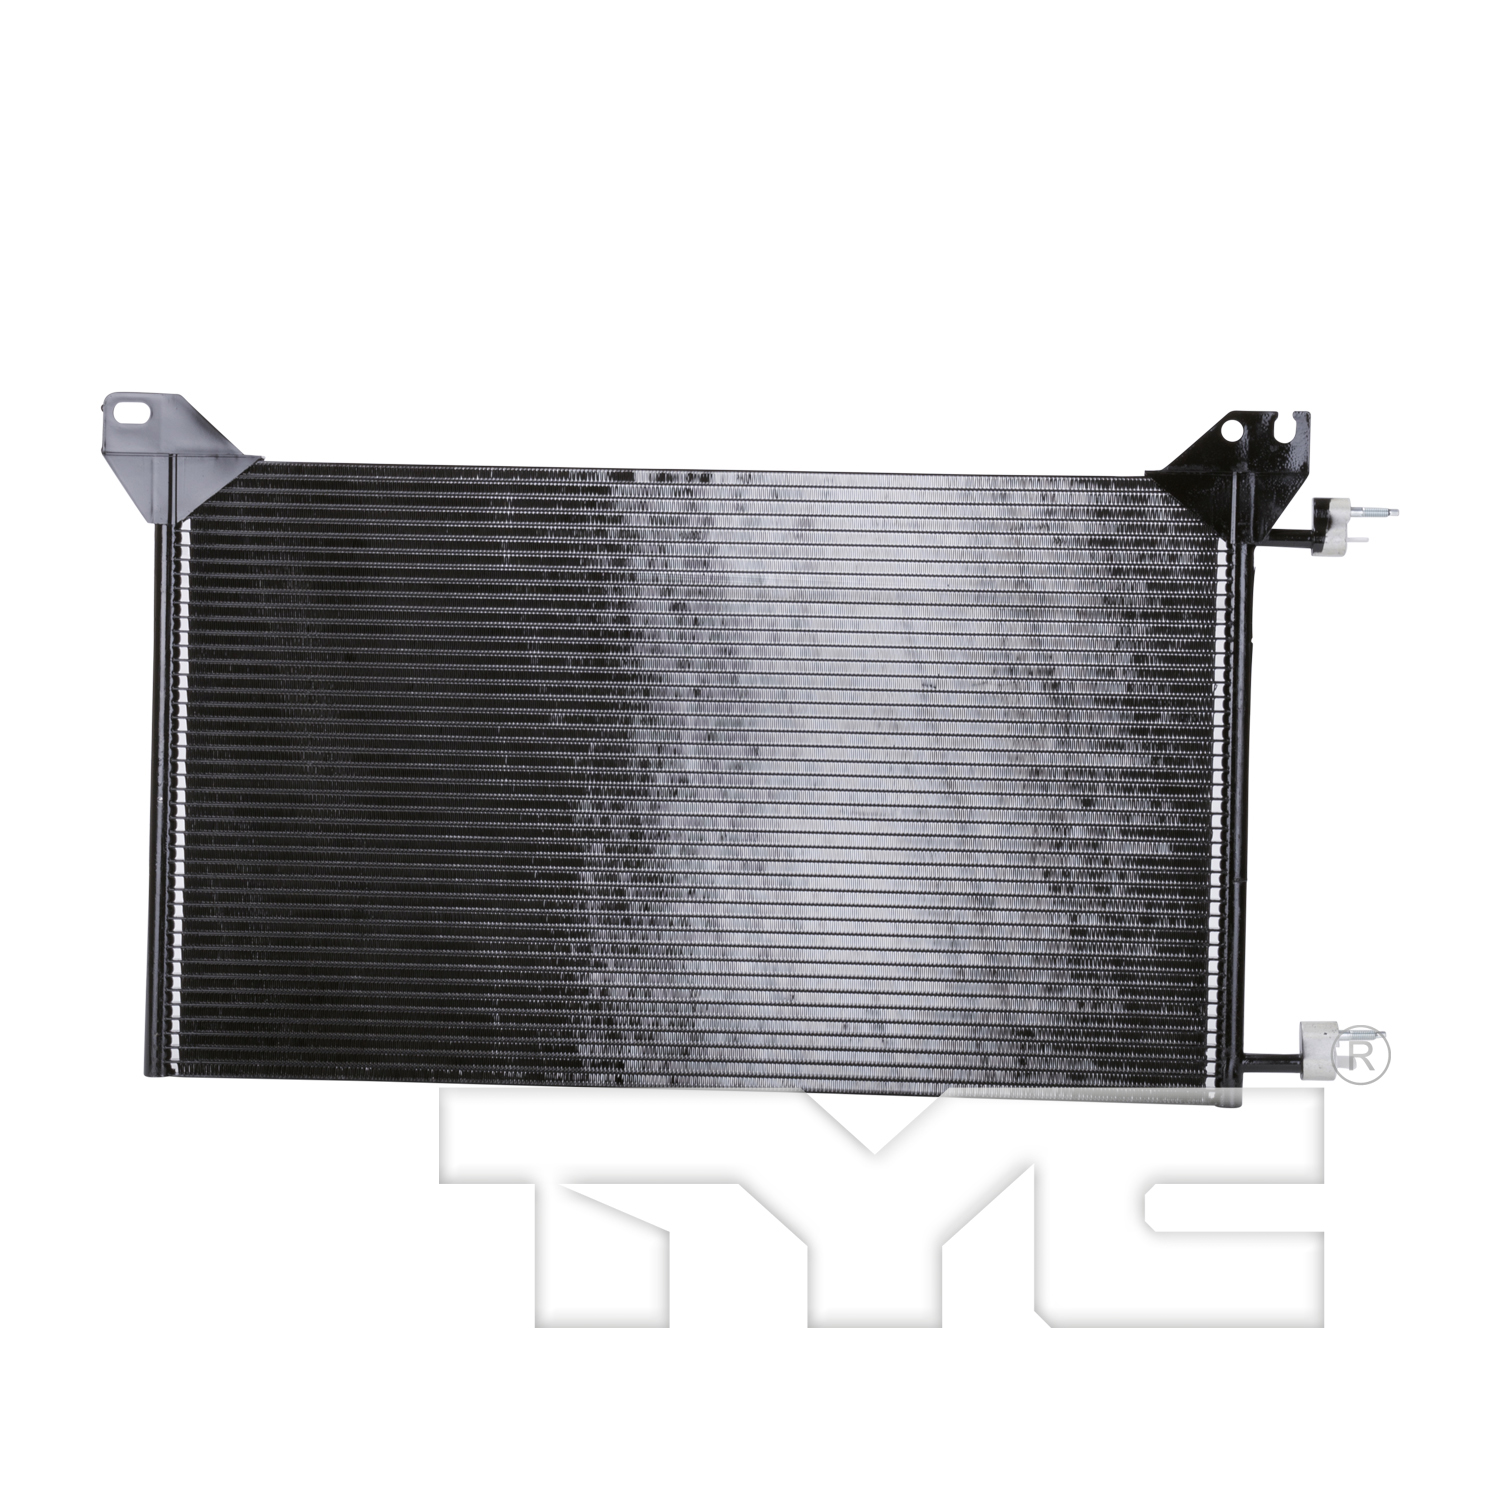 Aftermarket AC CONDENSERS for GMC - SIERRA 3500 CLASSIC, SIERRA 3500 CLASSIC,07-07,Air conditioning condenser